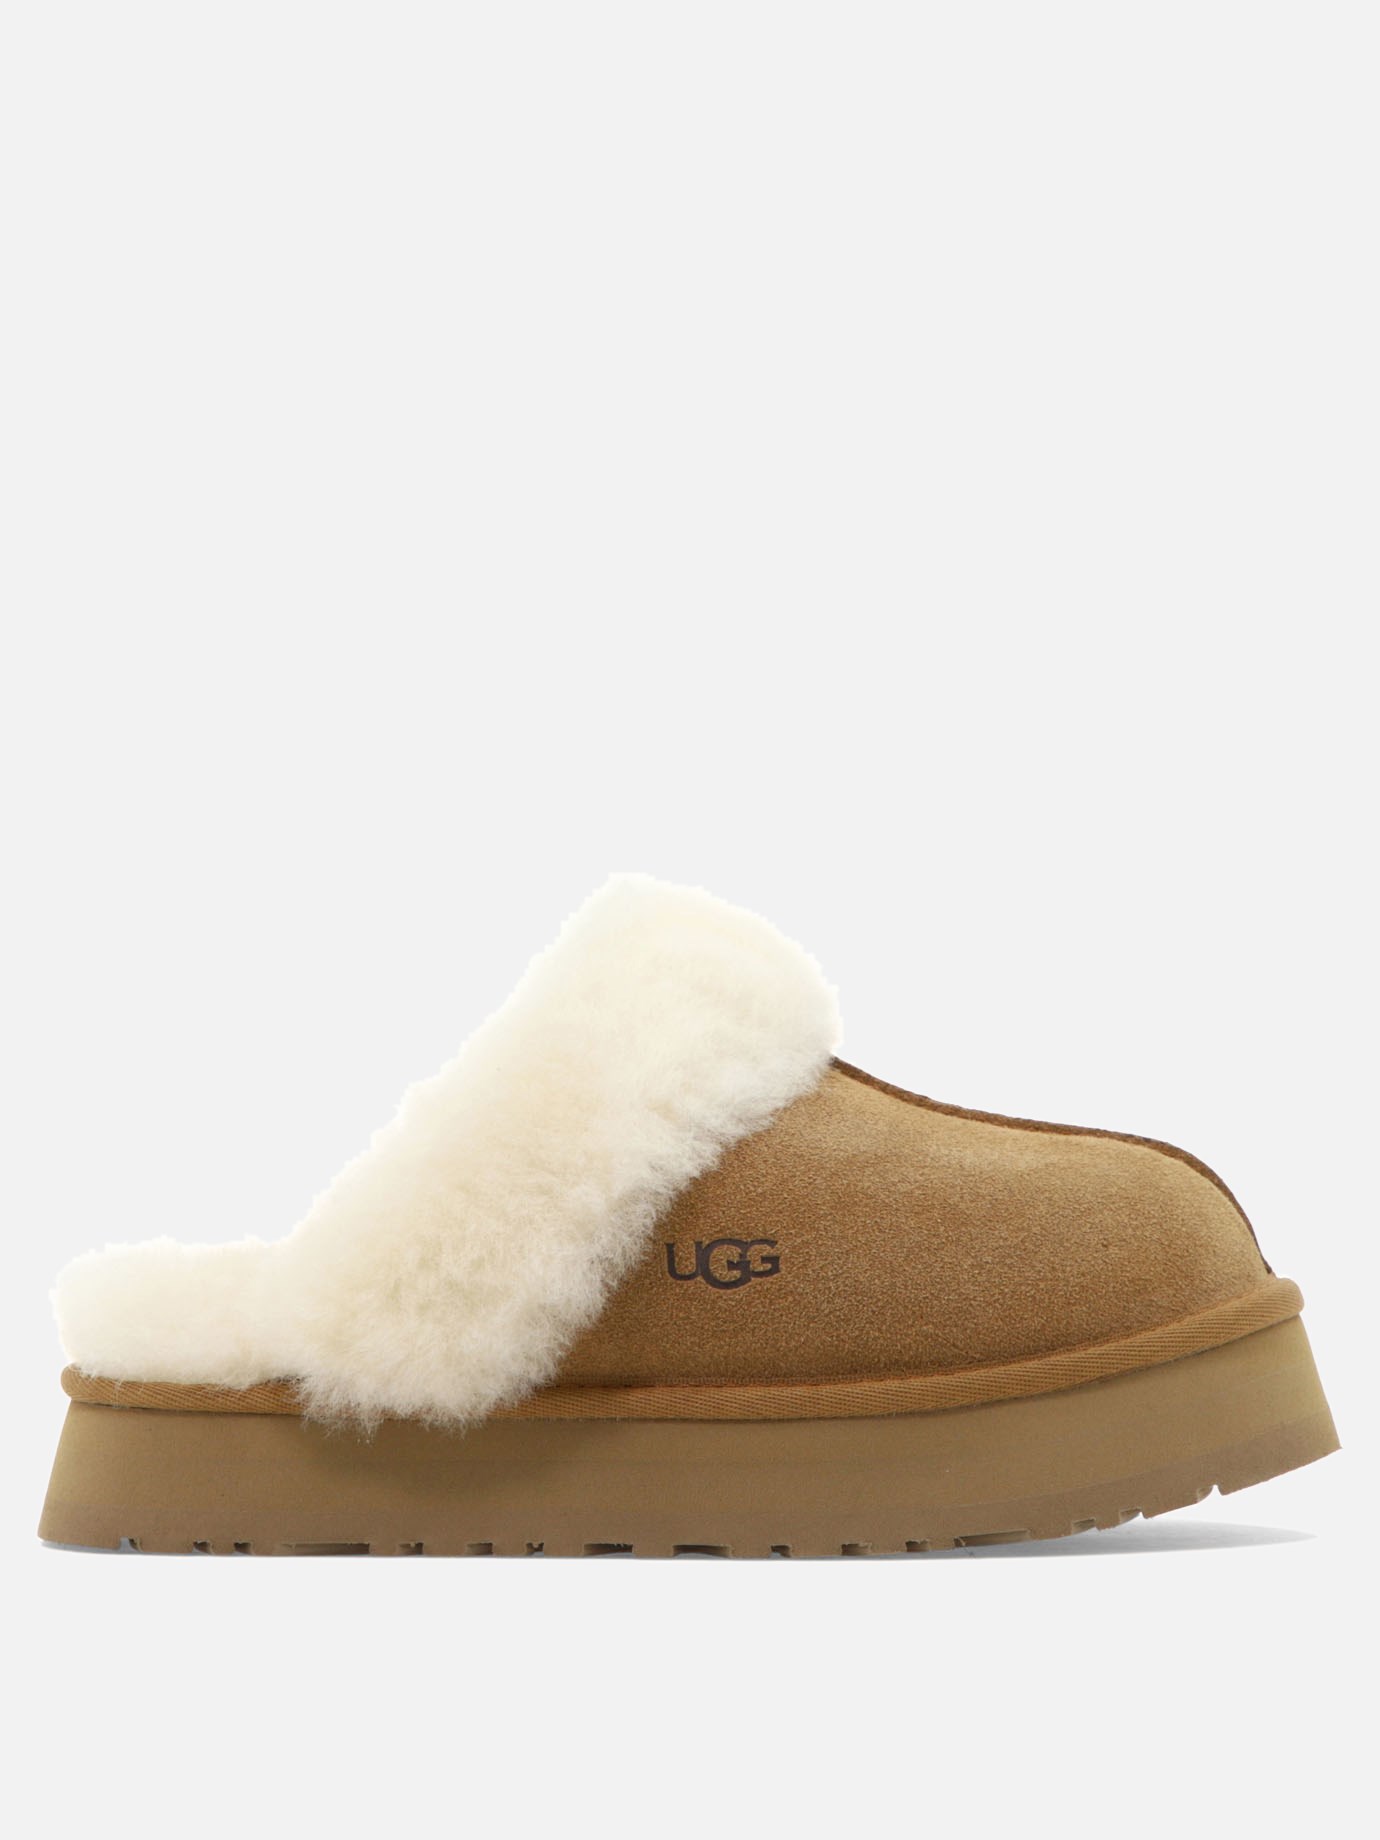  Disquette  slippersby Ugg - 5